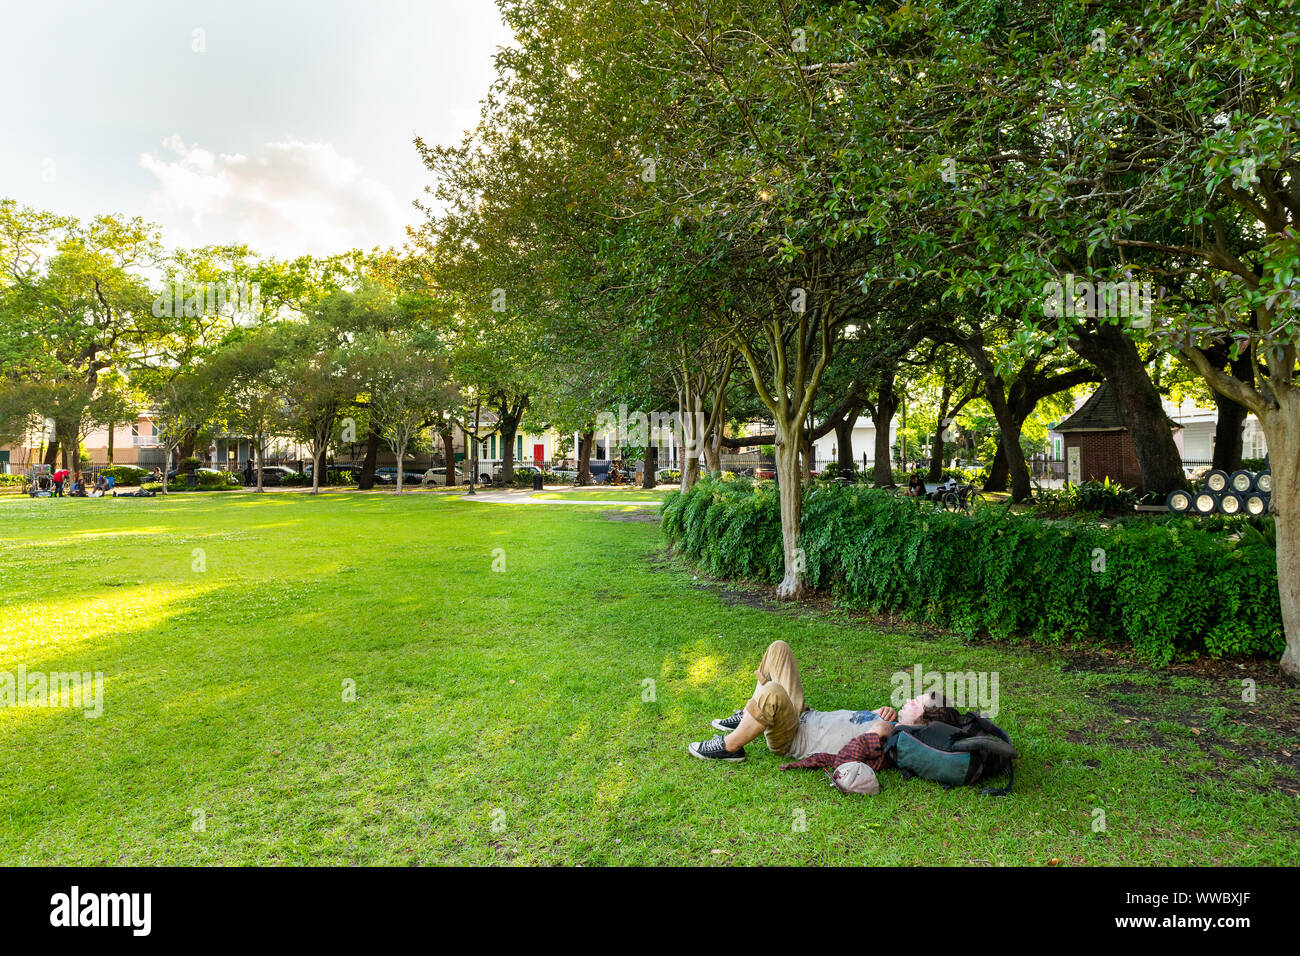 New Orleans, USA - April 22, 2018: Washington Square park on Elysian Fields Avenue, Dauphine street with people, man lying down on lawn in French quar Stock Photo